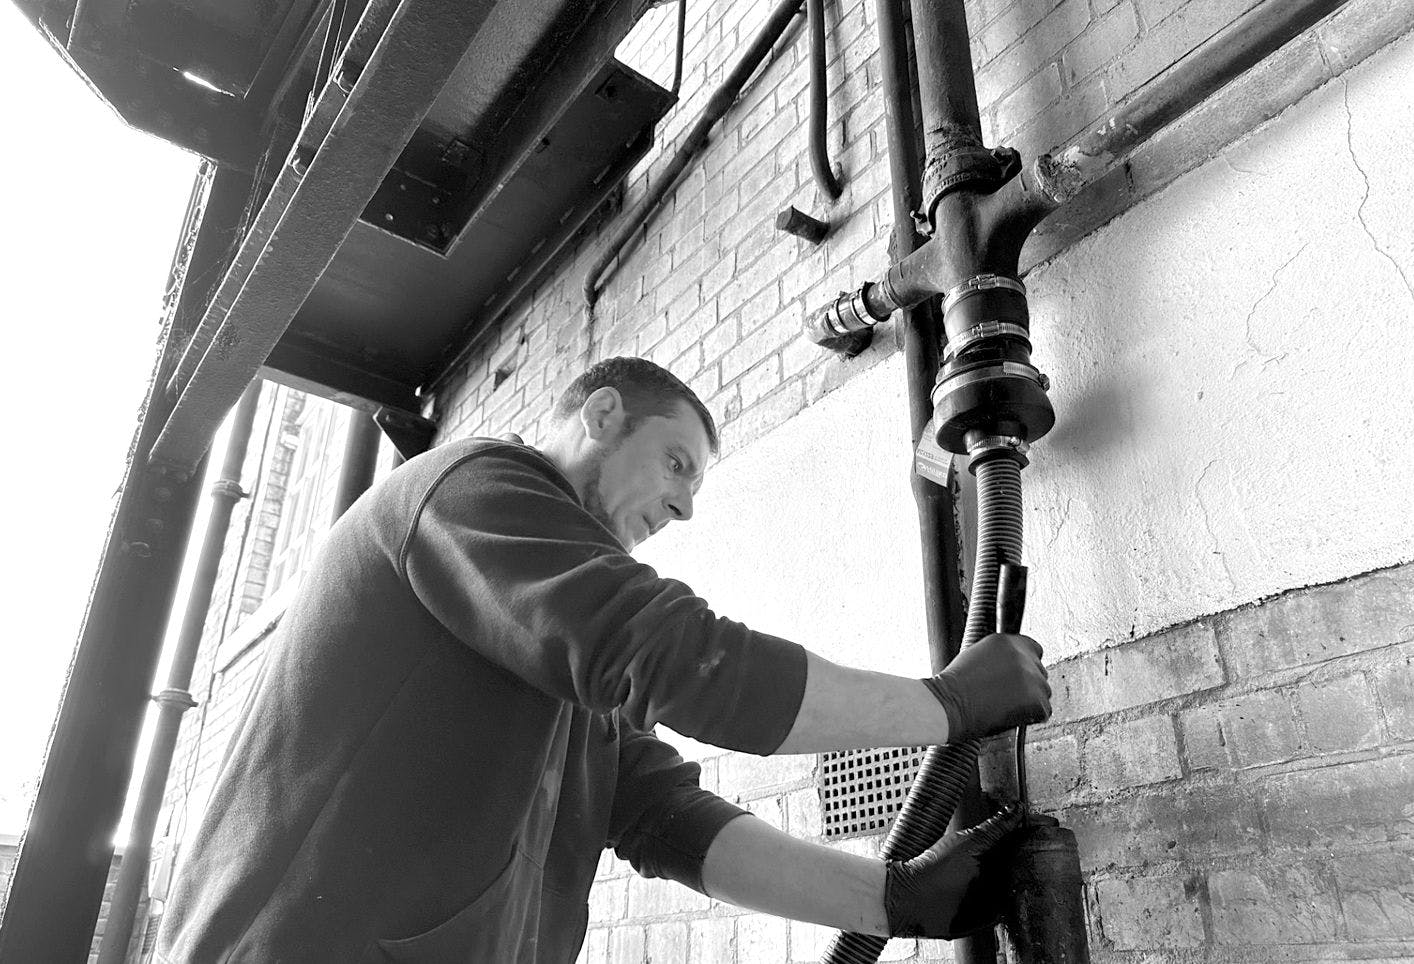 Man repairing cast iron waste pipes